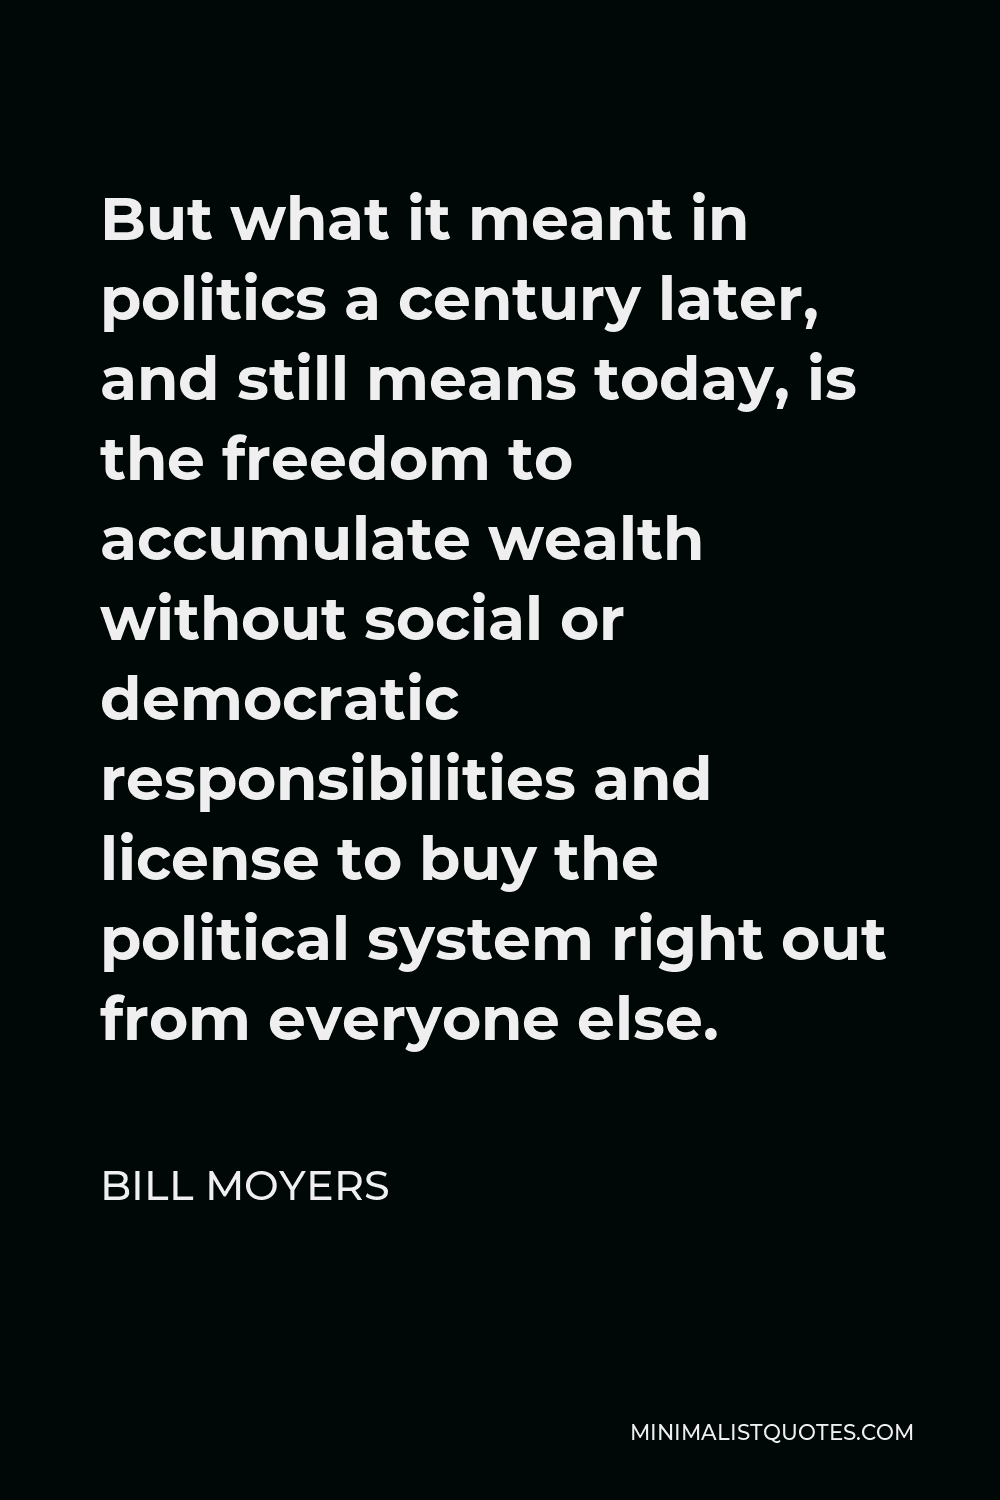 Bill Moyers Quote - But what it meant in politics a century later, and still means today, is the freedom to accumulate wealth without social or democratic responsibilities and license to buy the political system right out from everyone else.